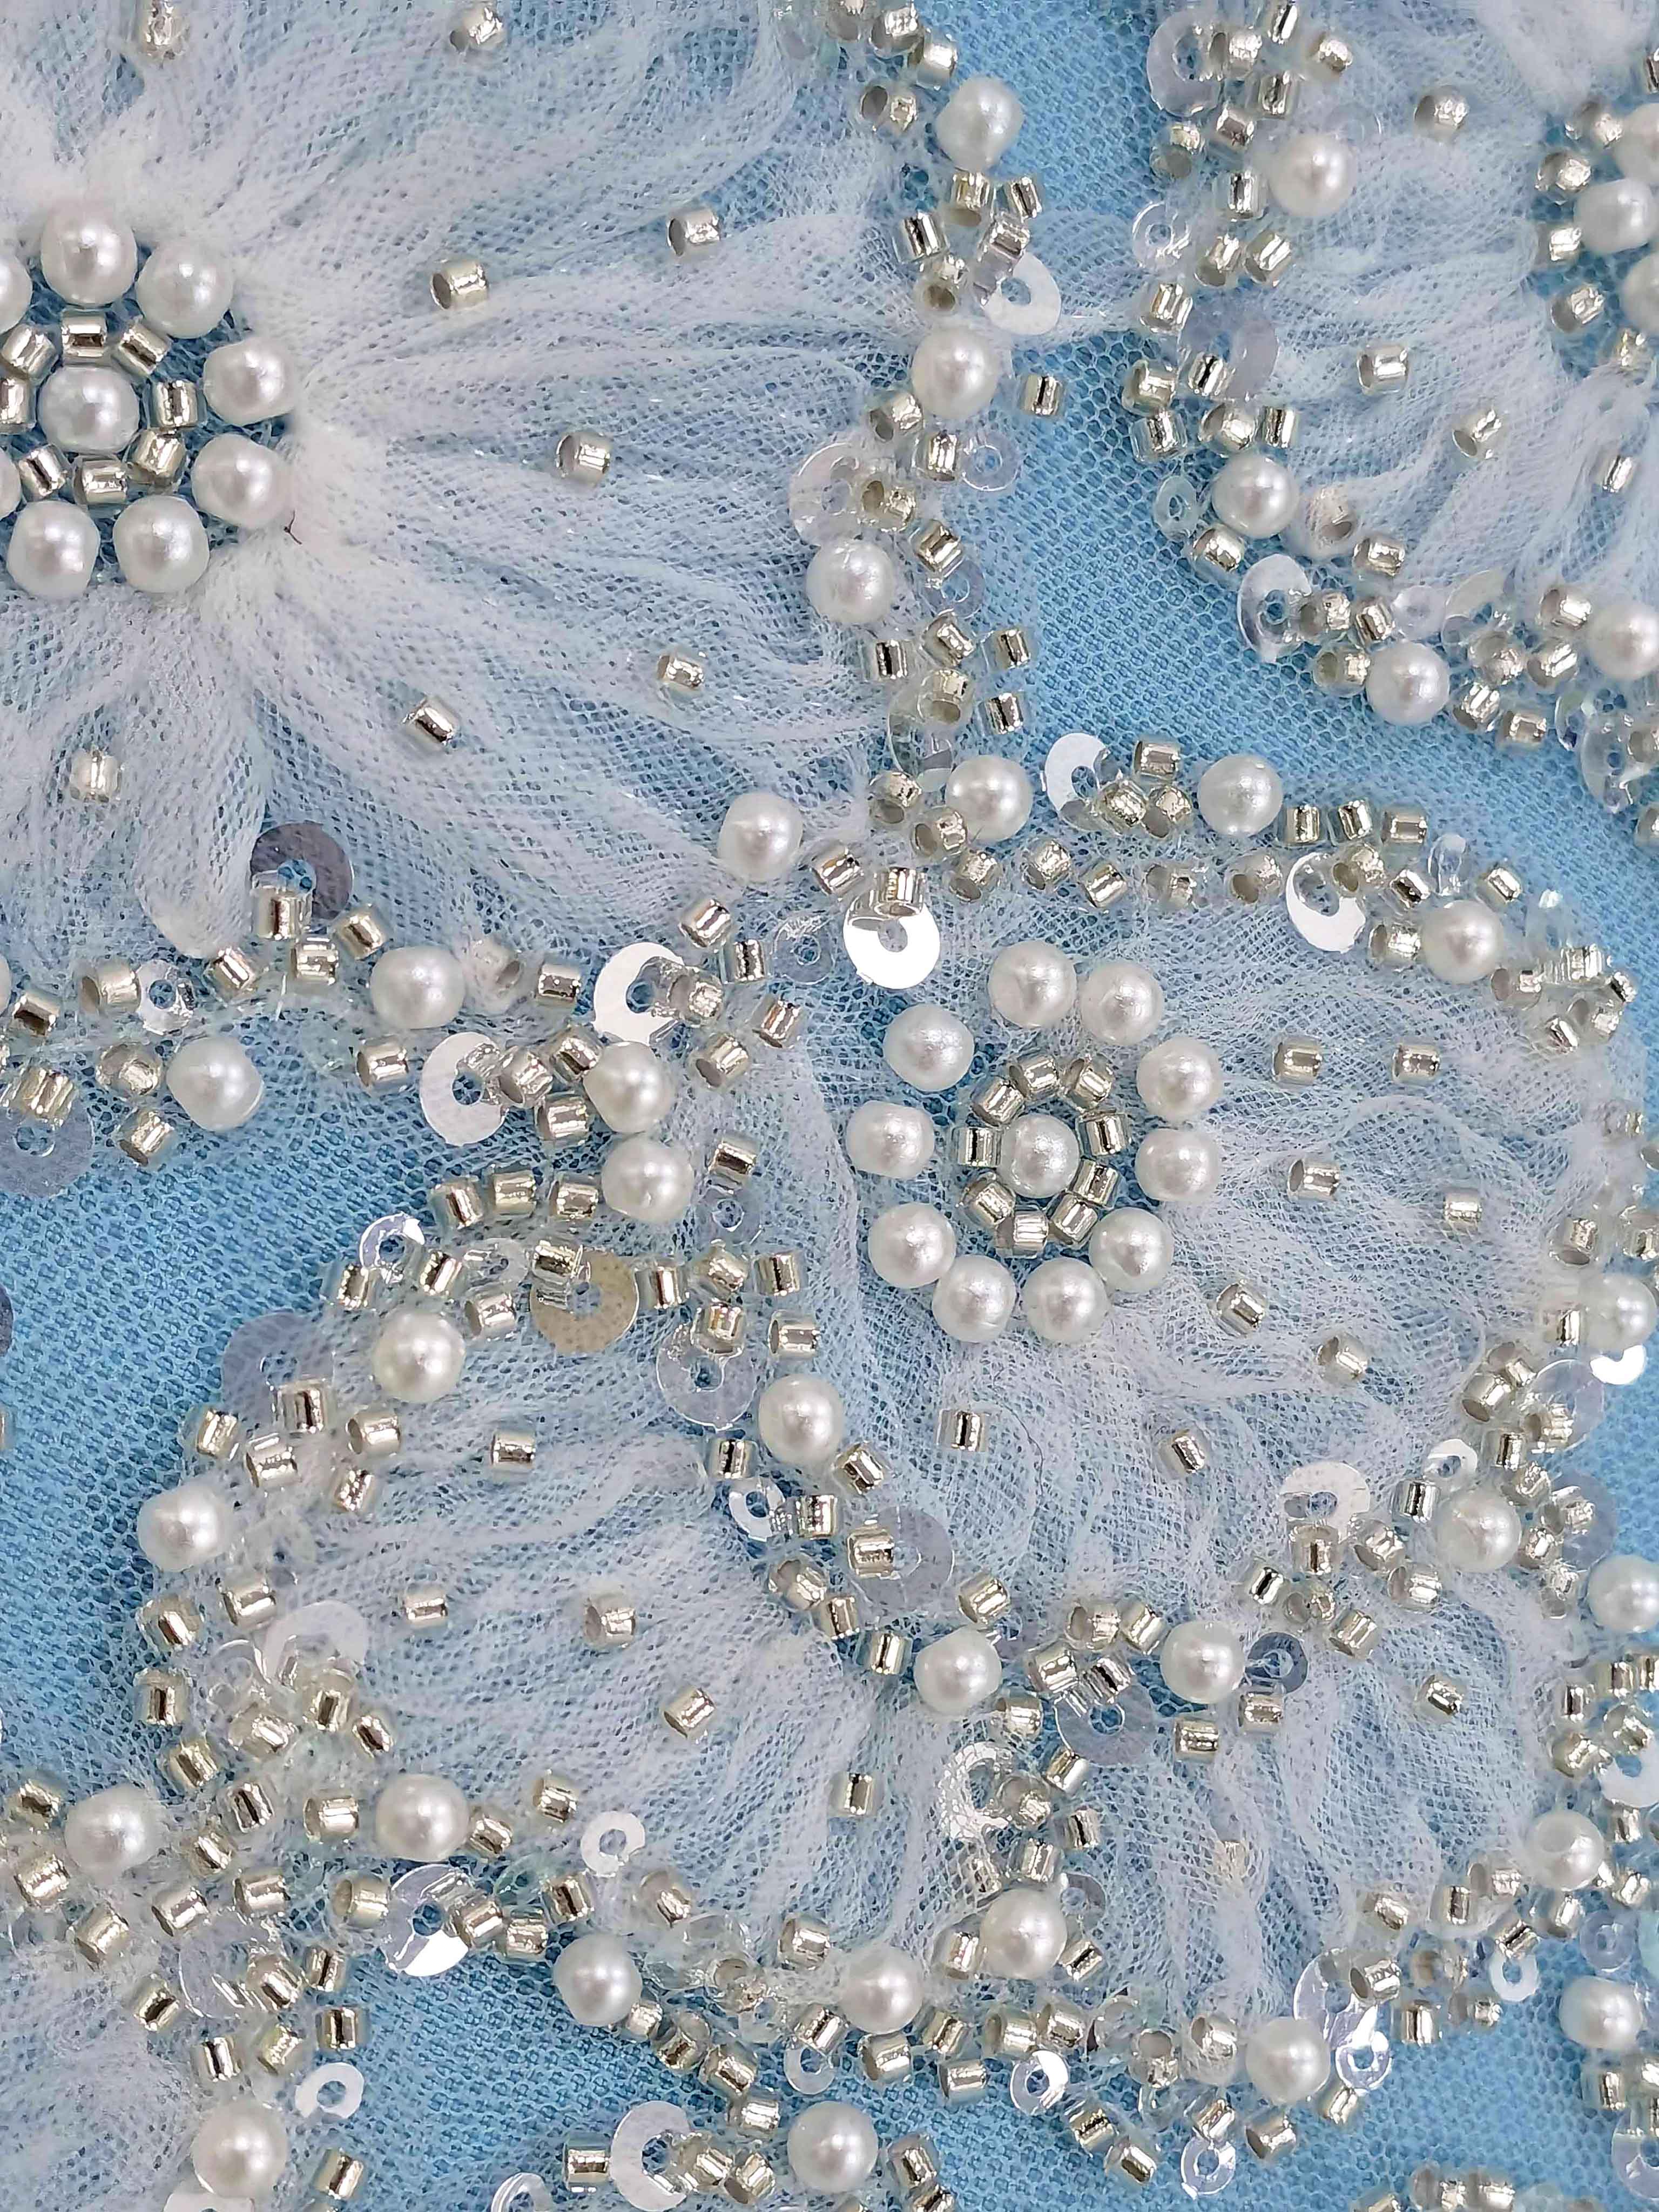 Professinal embroidery lace fabric supplier manufacturer | Newrichlace.com